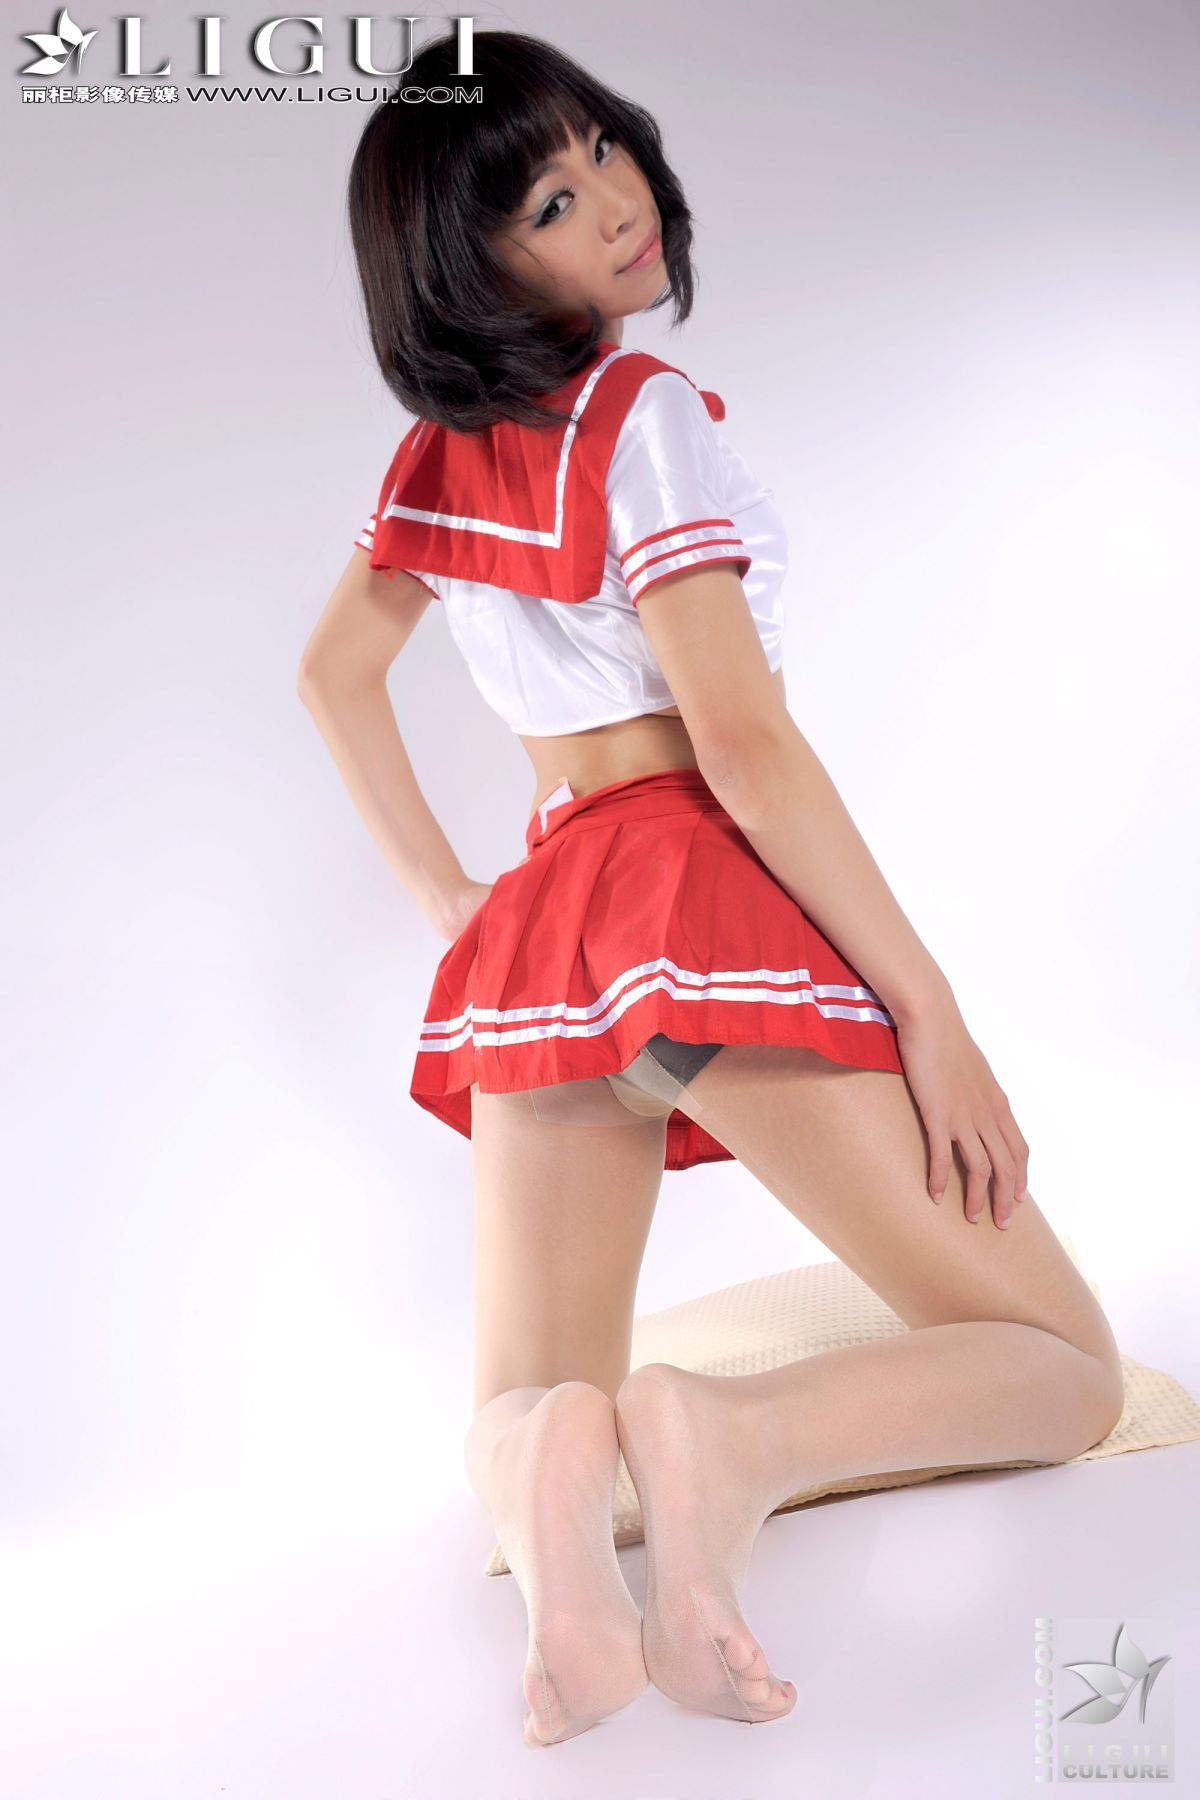 Tian Tian's red sailor suit (Part 2) [ligui] model with beautiful legs and silk stockings